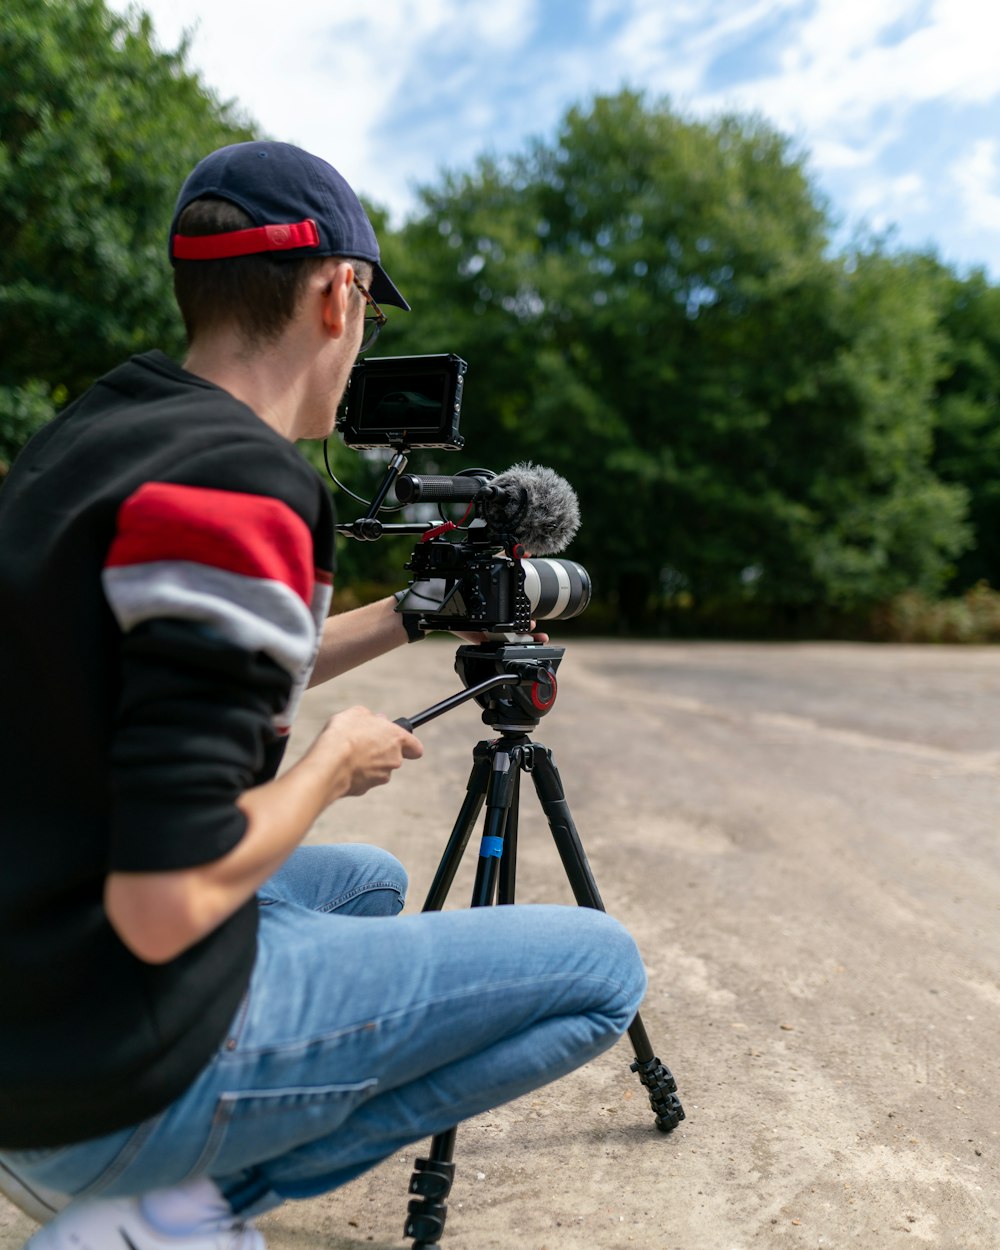 man in black and red jacket and blue denim jeans holding black video camera